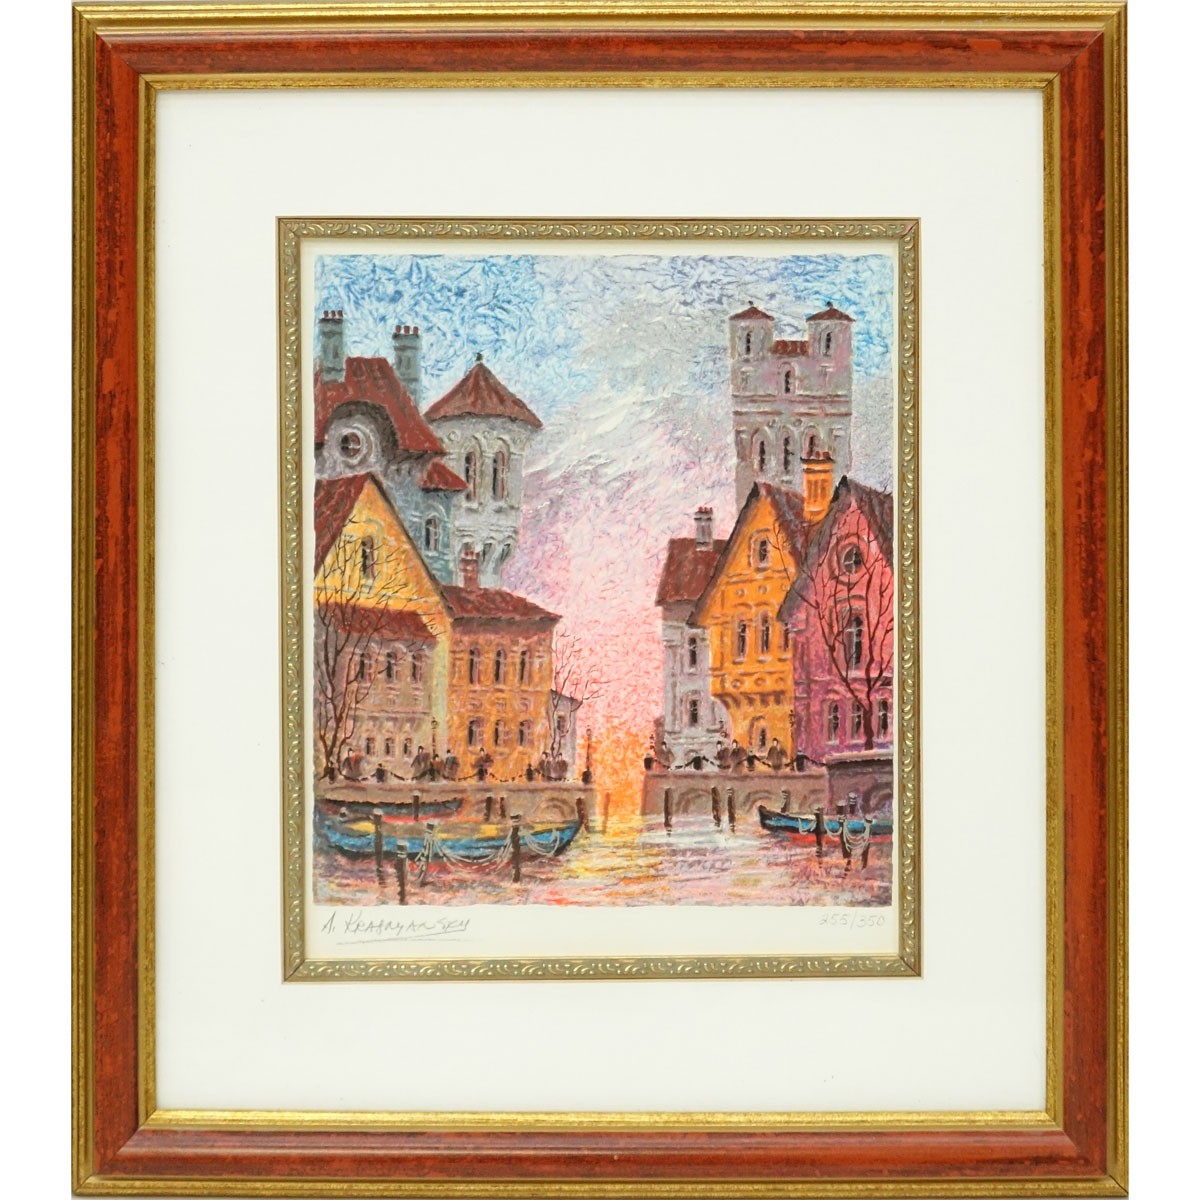 Anatol Krasnyansky, Ukrainian (born 1930) Serigraph in Color on Wove Paper, Gdansk near Harbor, Signed and Numbered 255/350. Good condition.